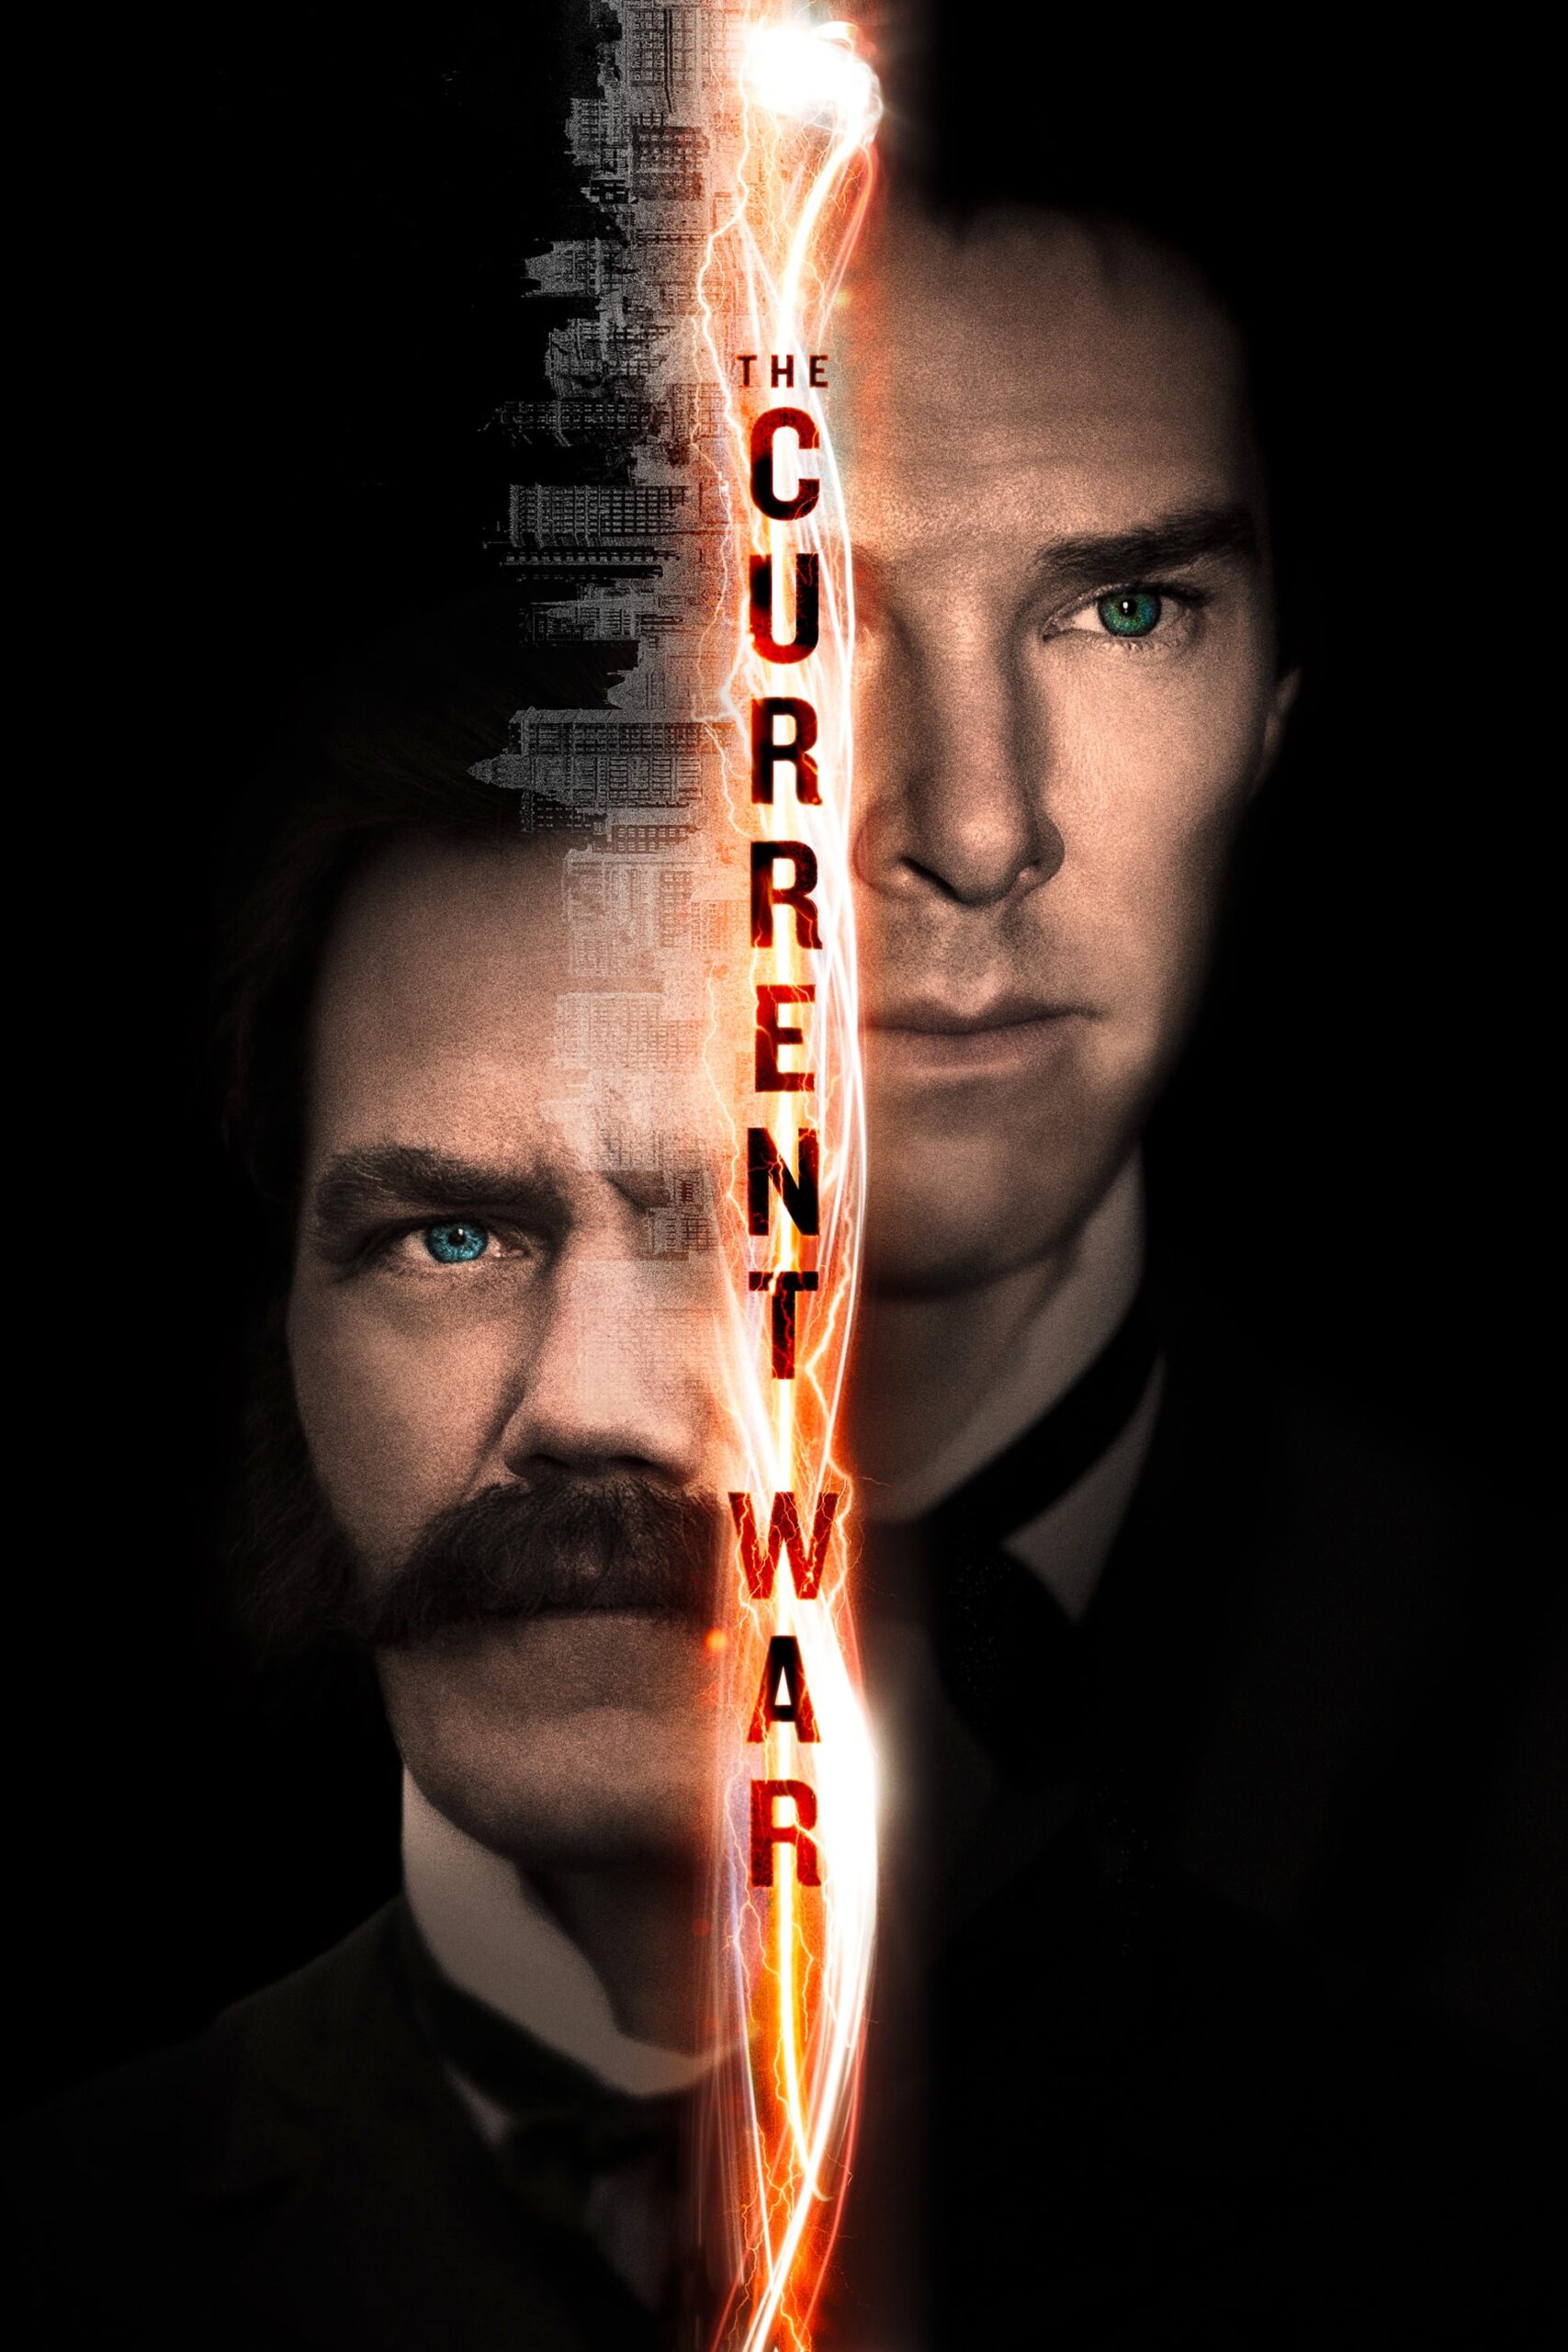 Poster for the movie "The Current War"